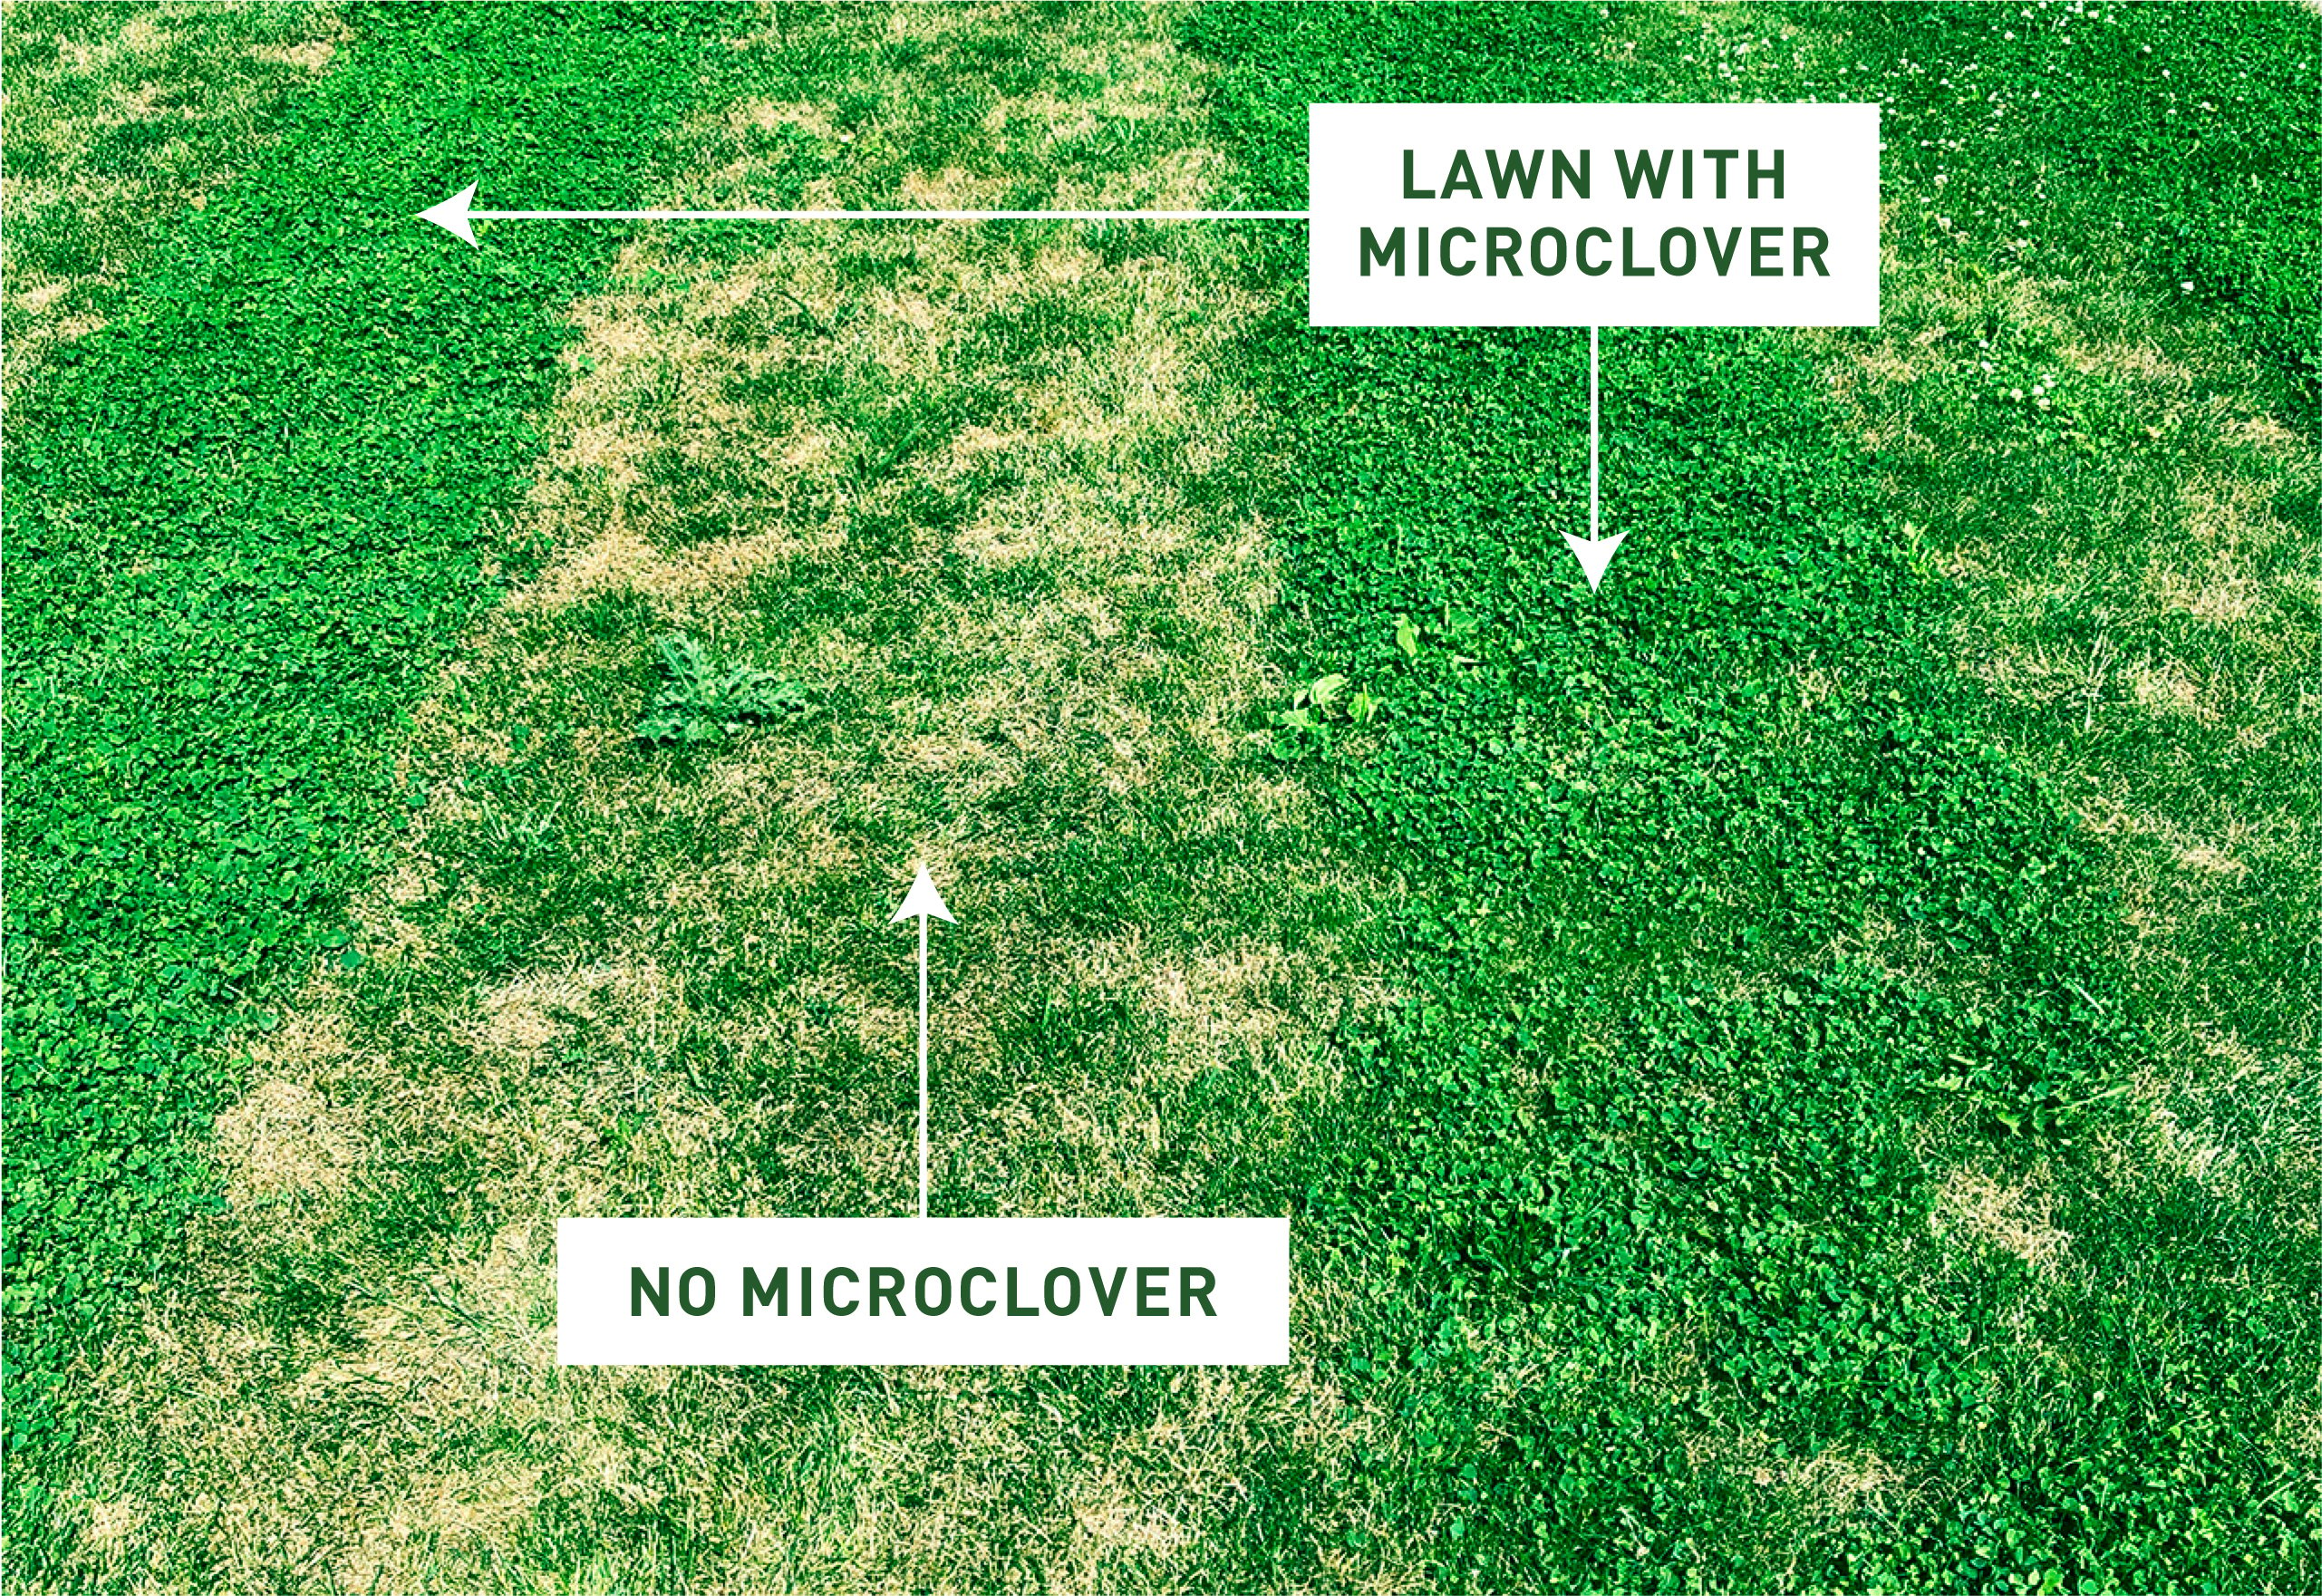 Microclover Lawn Comparison Mowing Heat